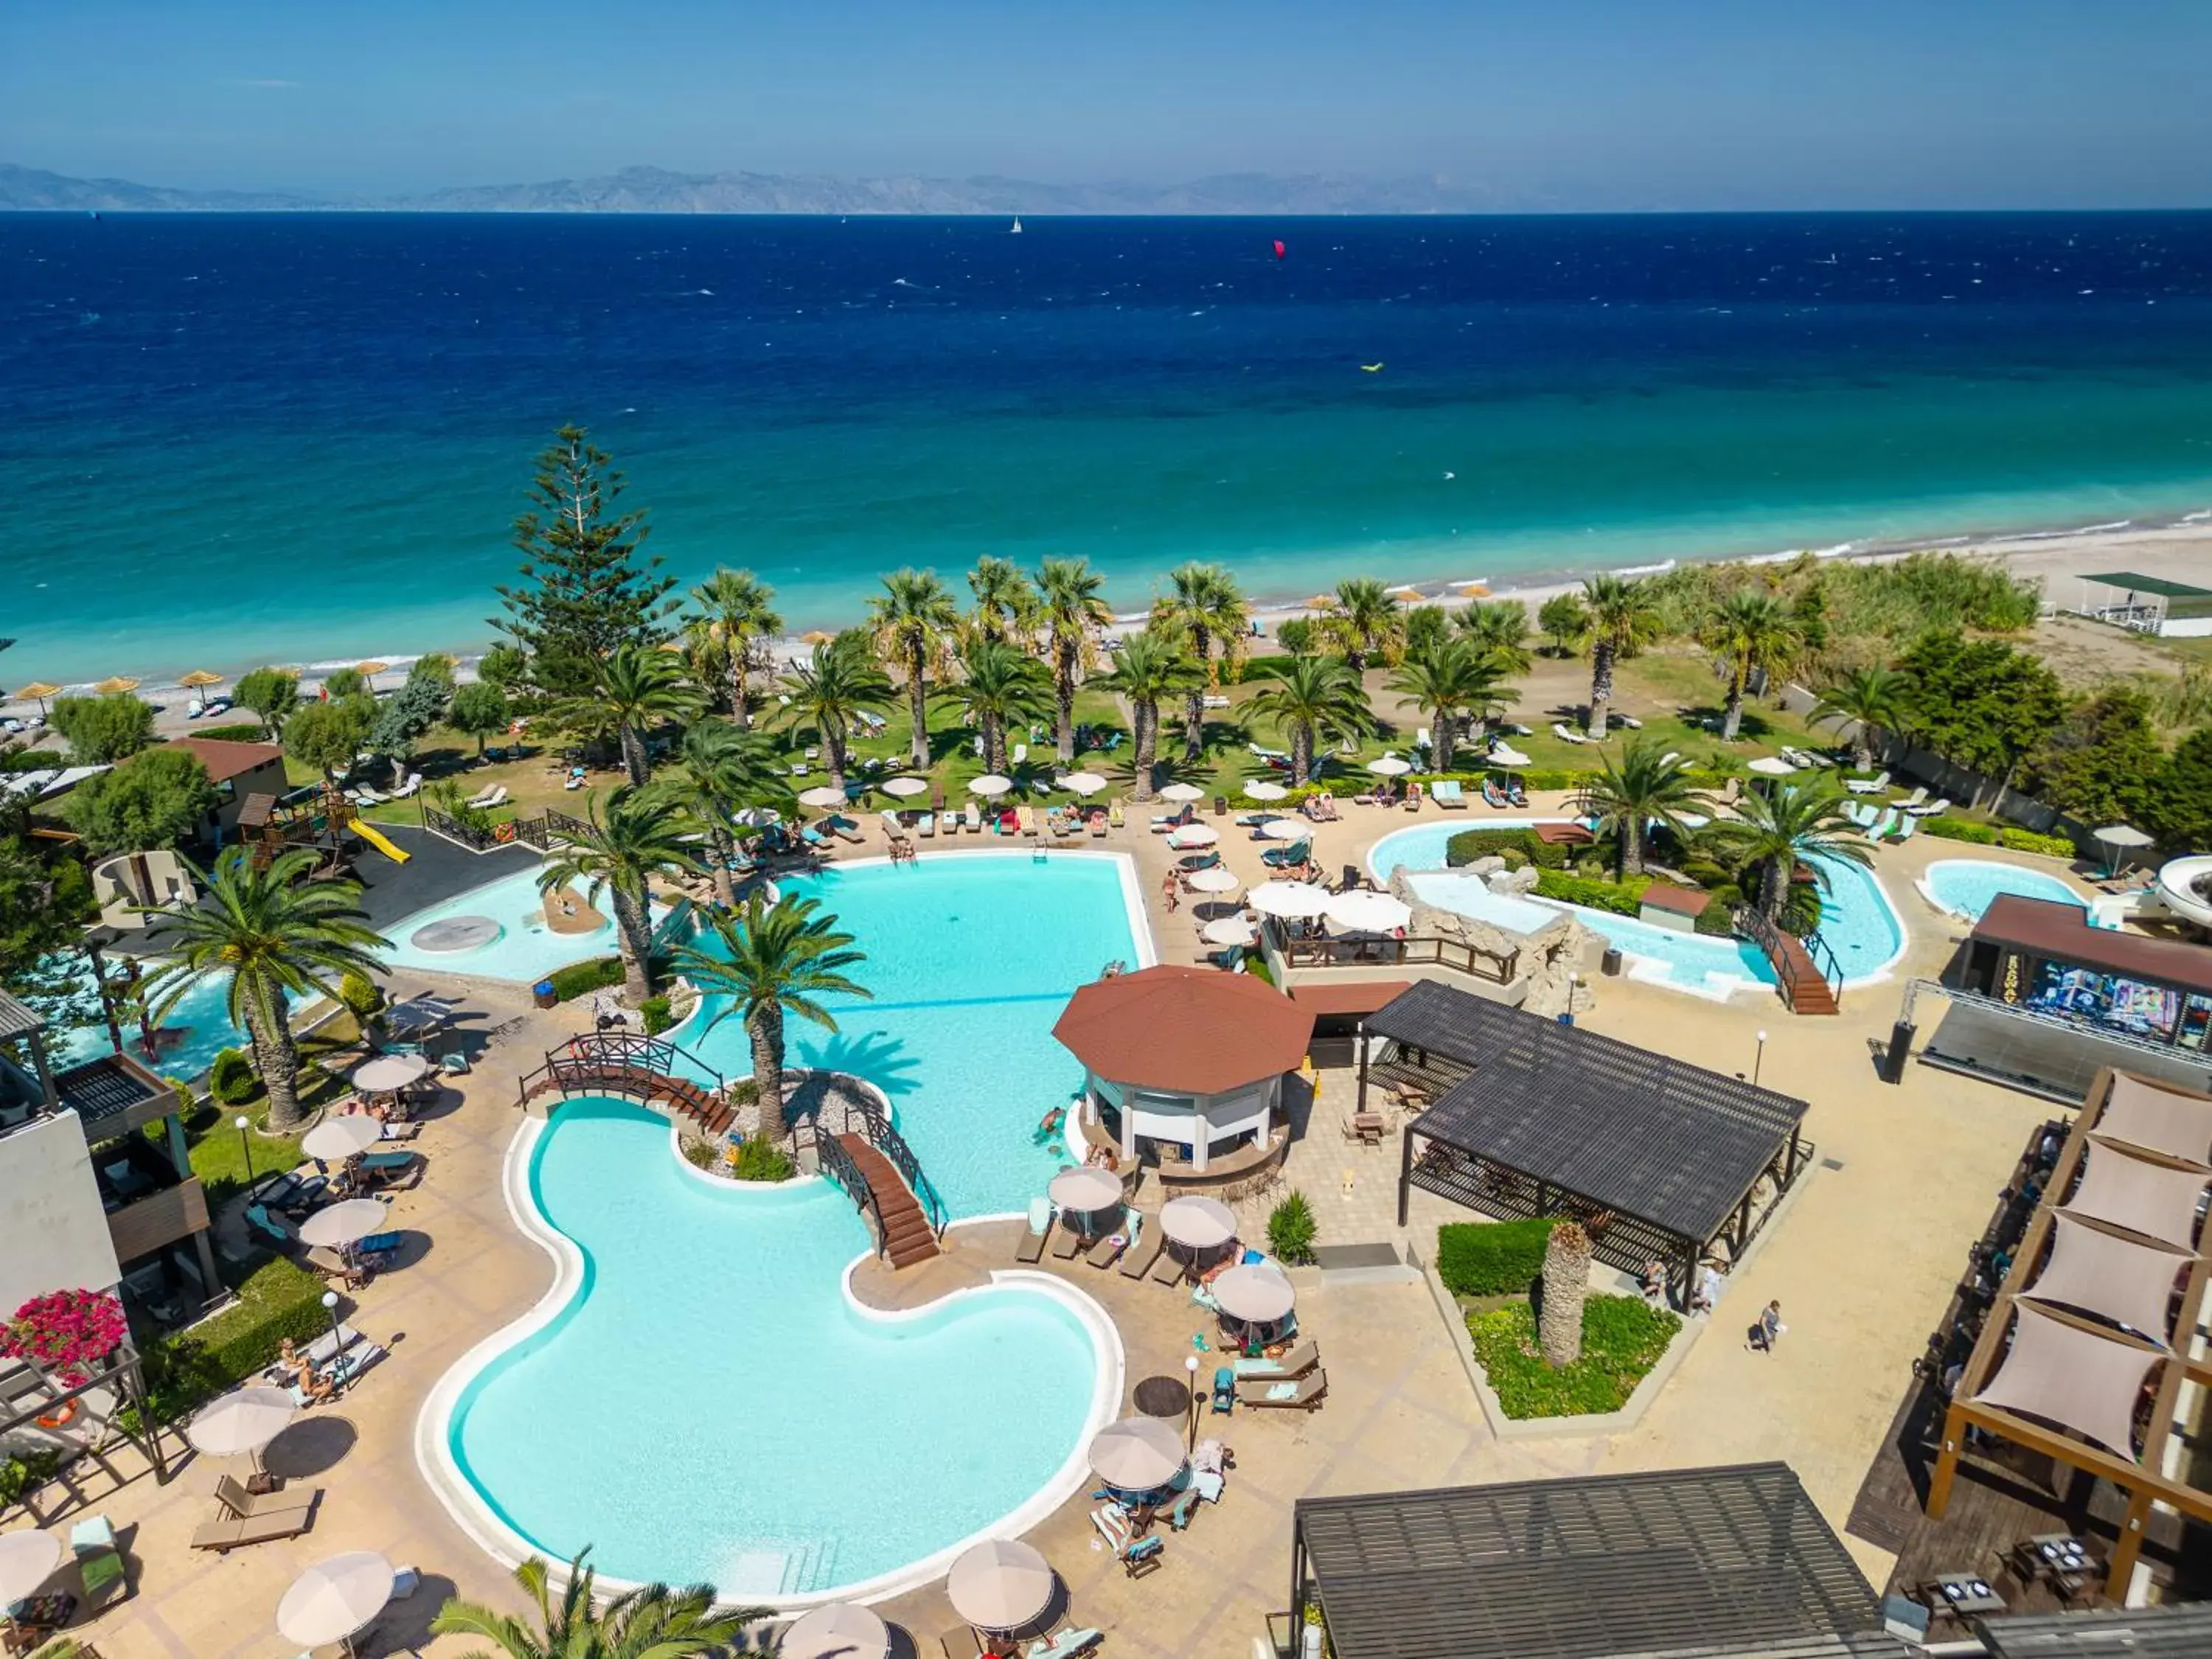 Pool view, Bird's-eye View in D'Andrea Mare Beach Hotel